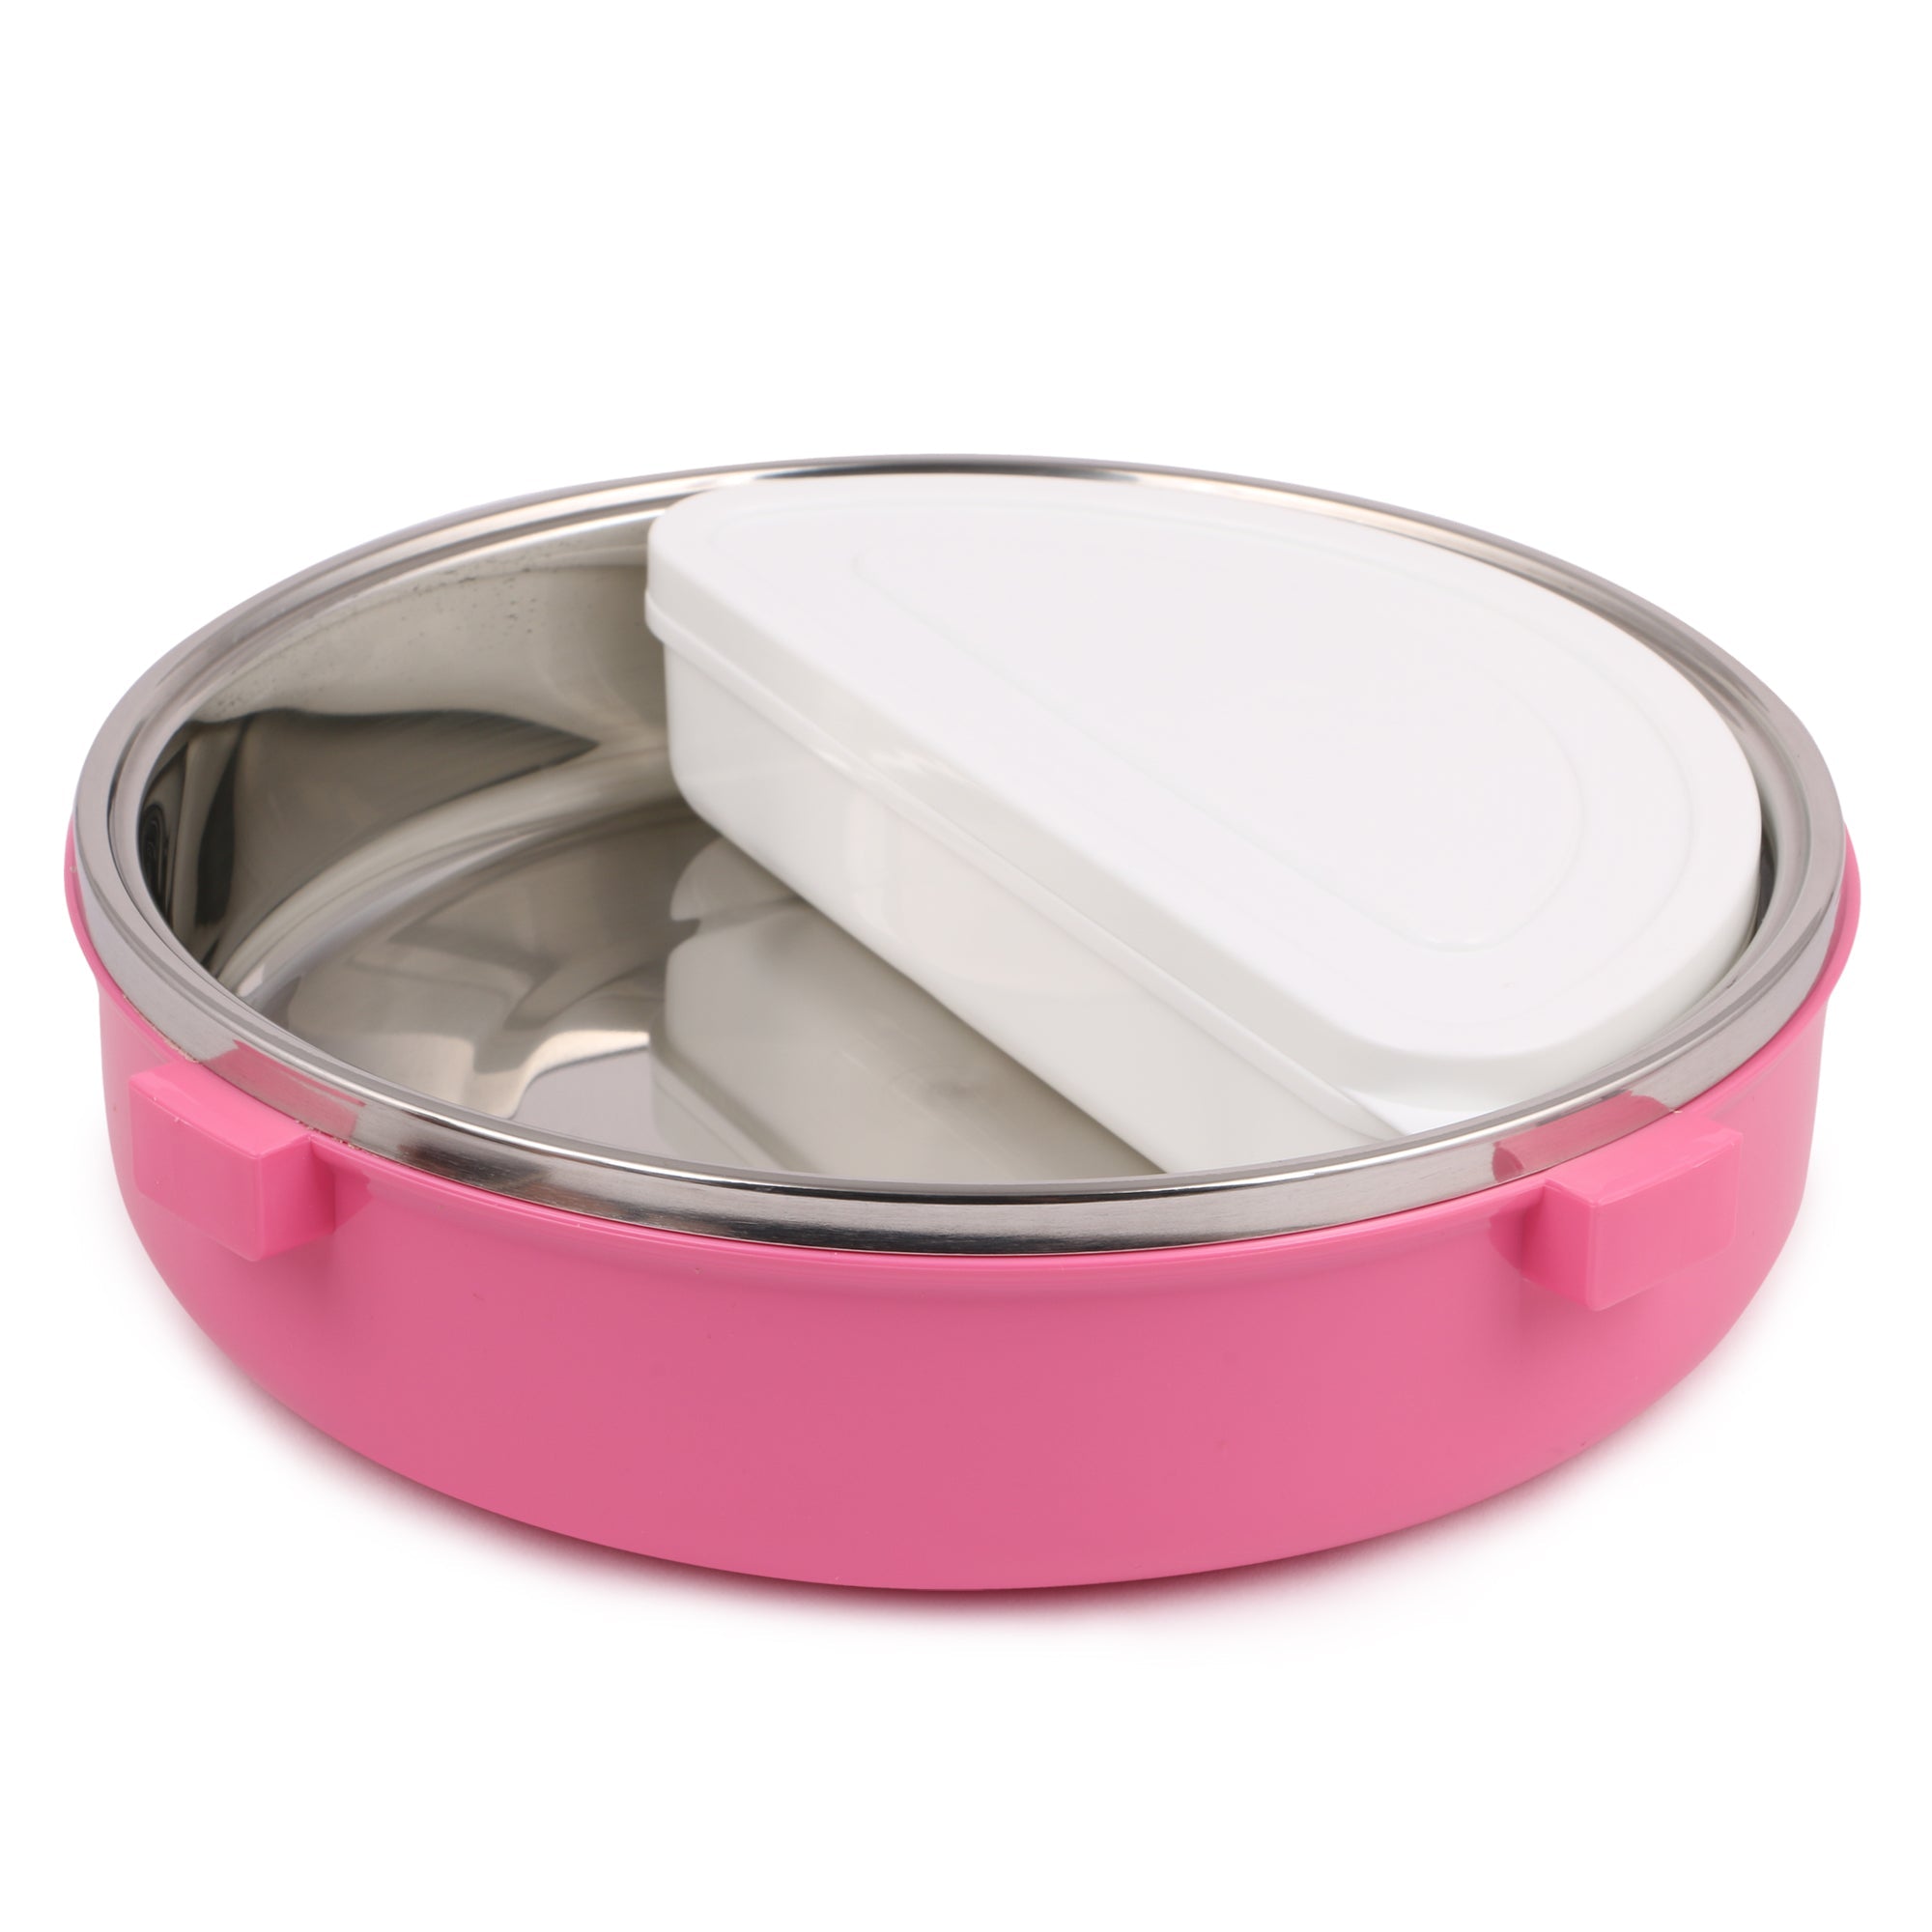 Round Shape Lunch Box Stainless Steel 6526 Inside and P.P Outside, 1 Inner Container & 1 Spoon (920ml)